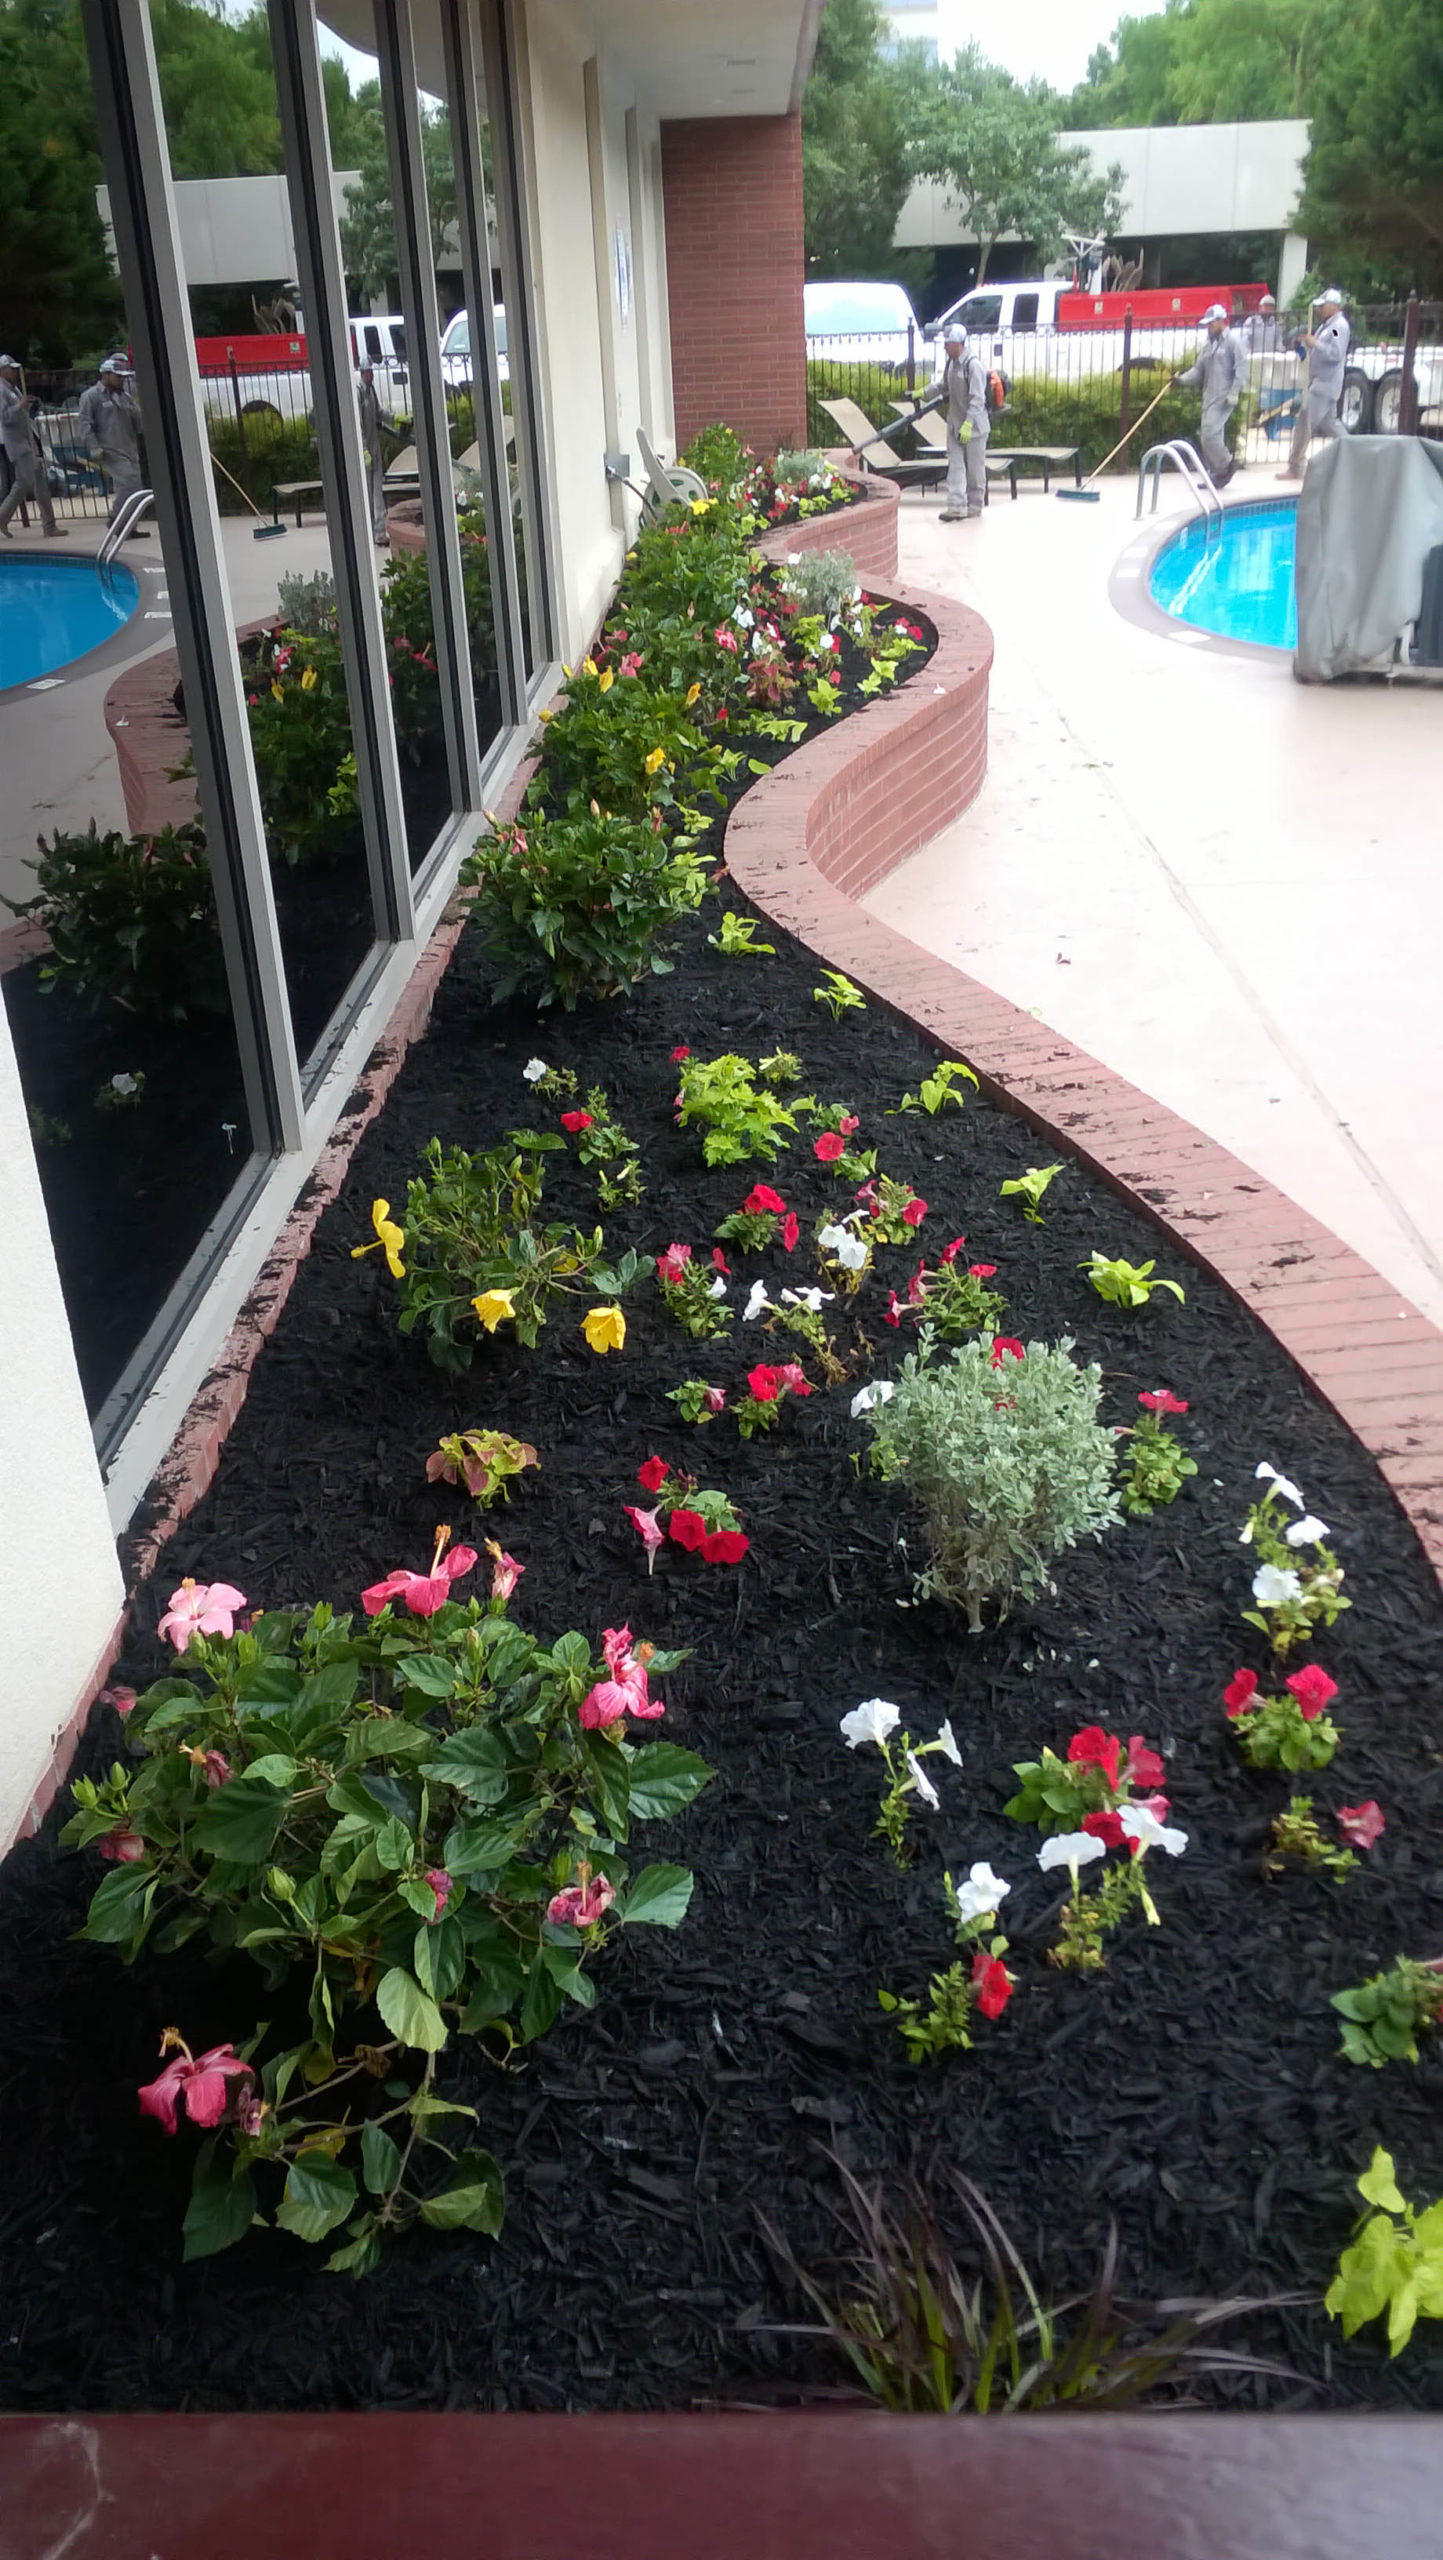 Commercial Landscaping Services, Fort Worth Landscaping Companies